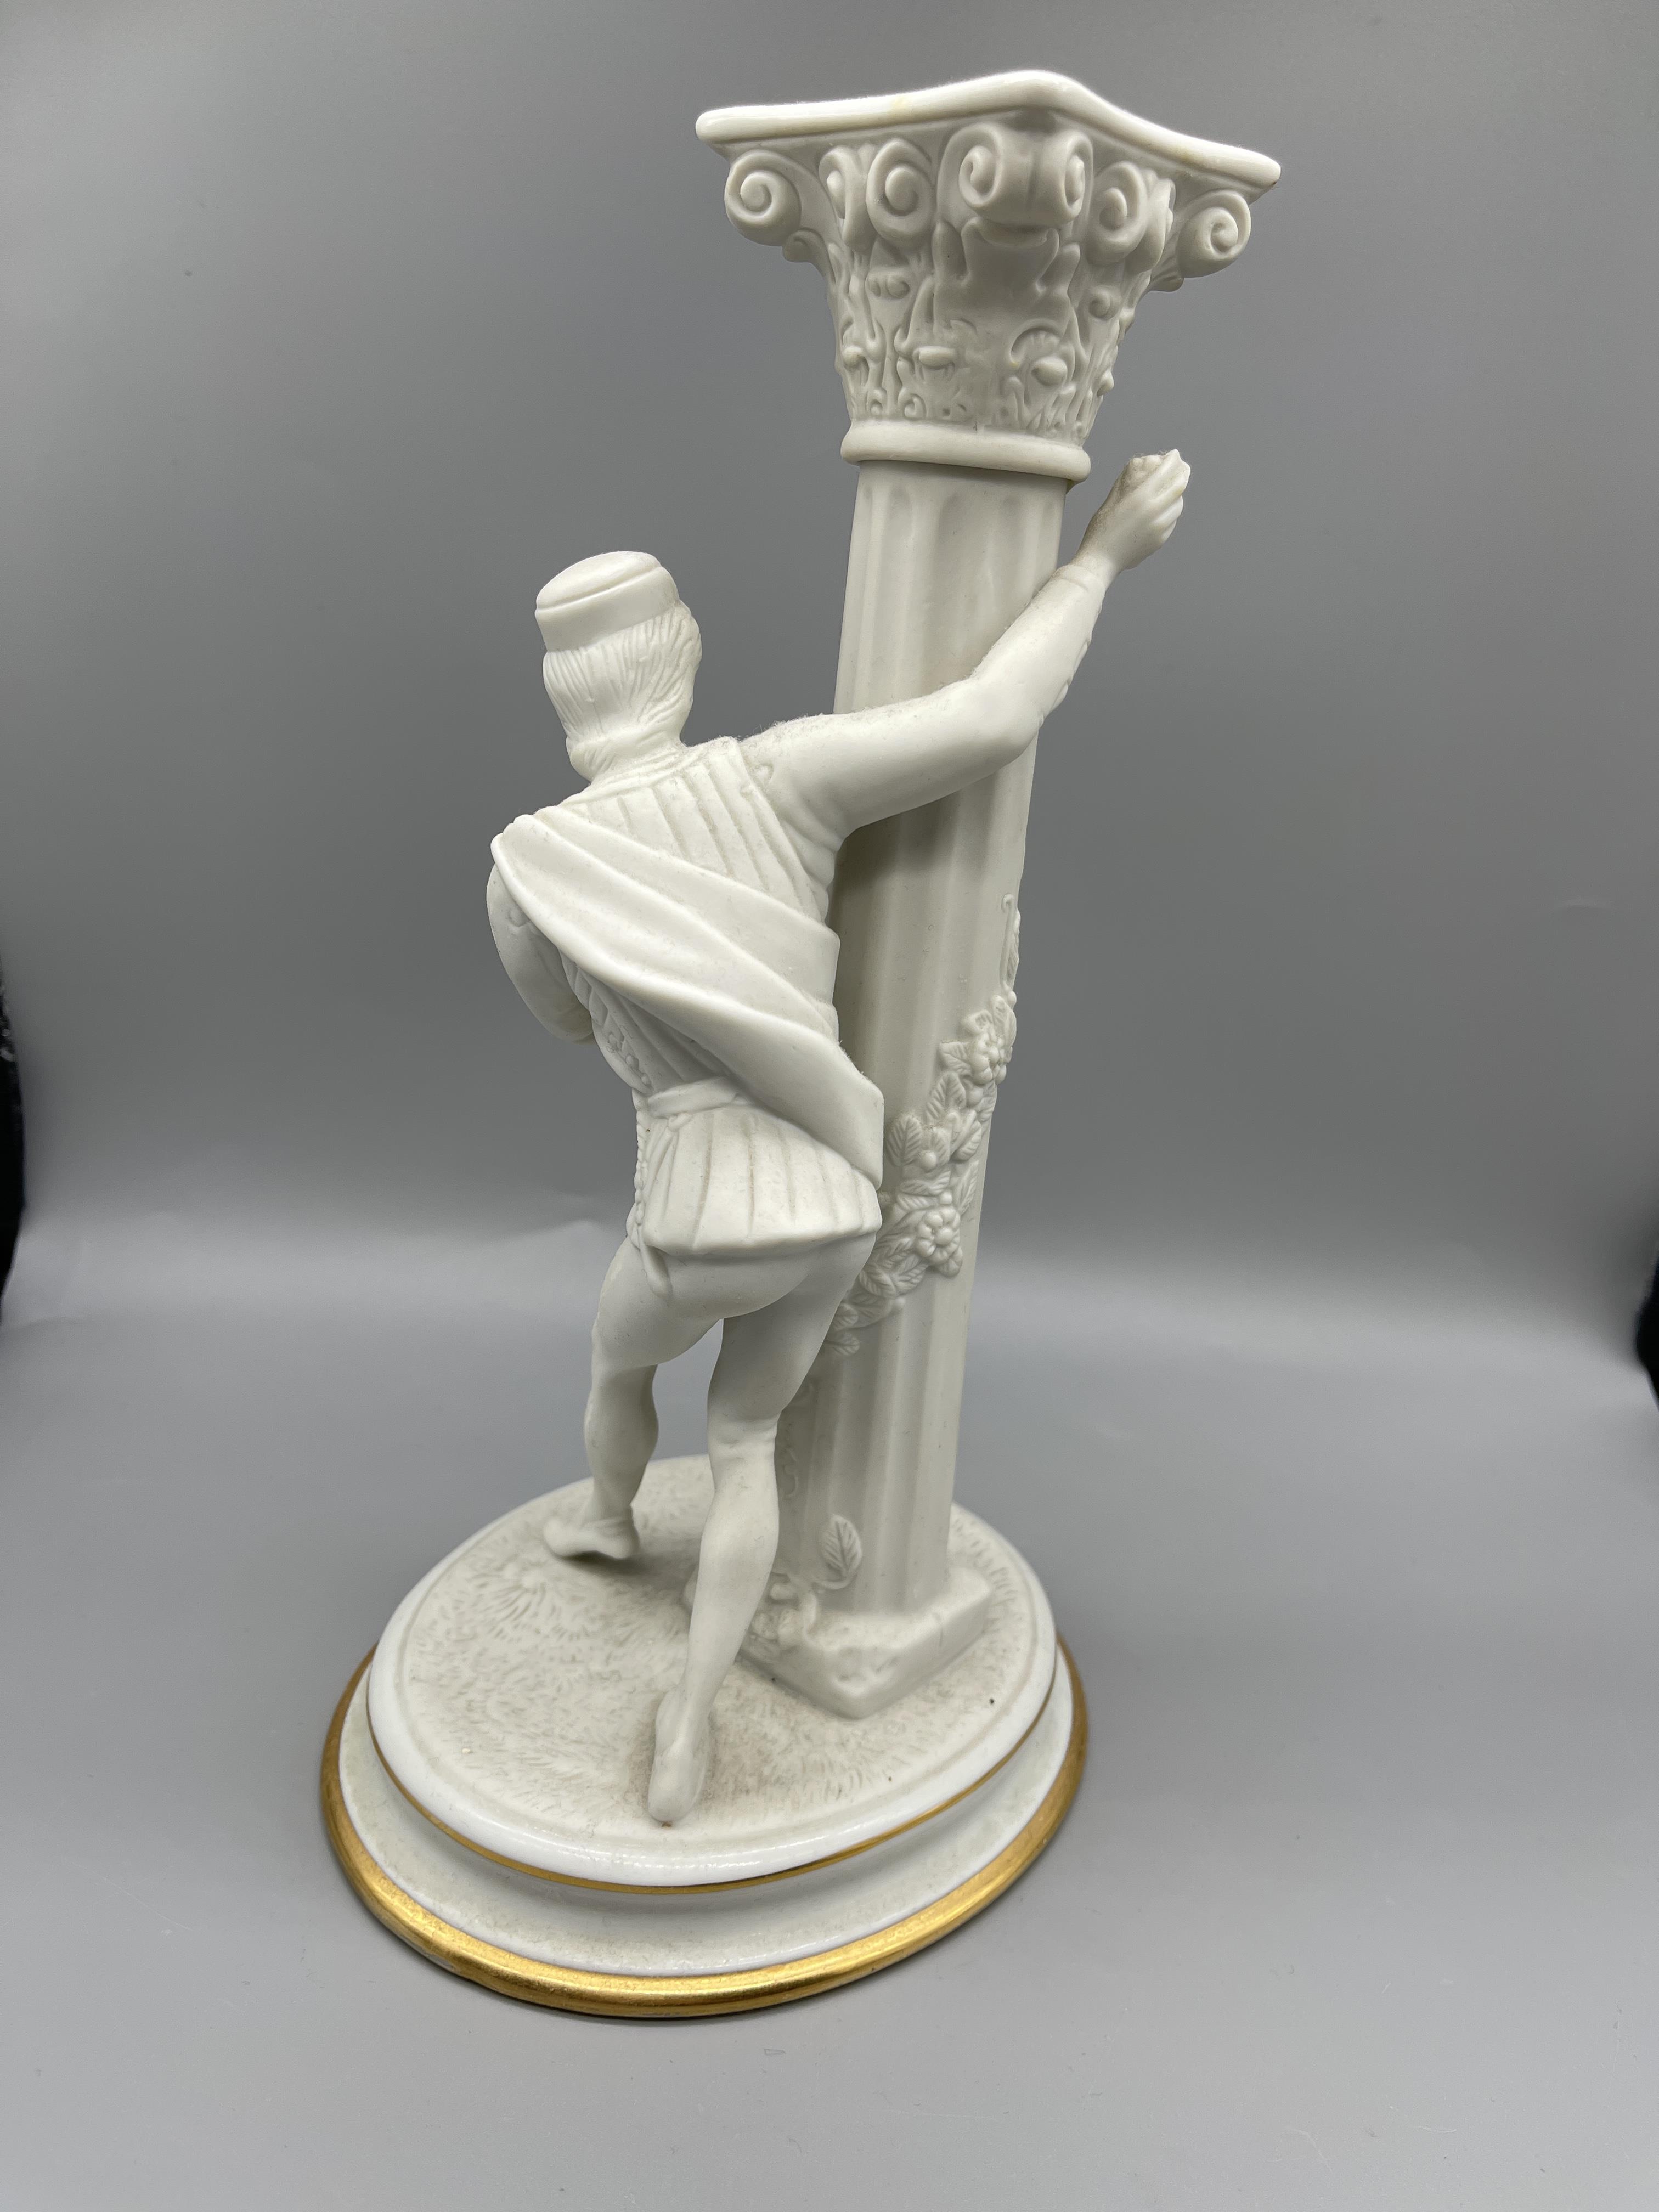 Romeo and Juliet Candelabras - Image 11 of 15